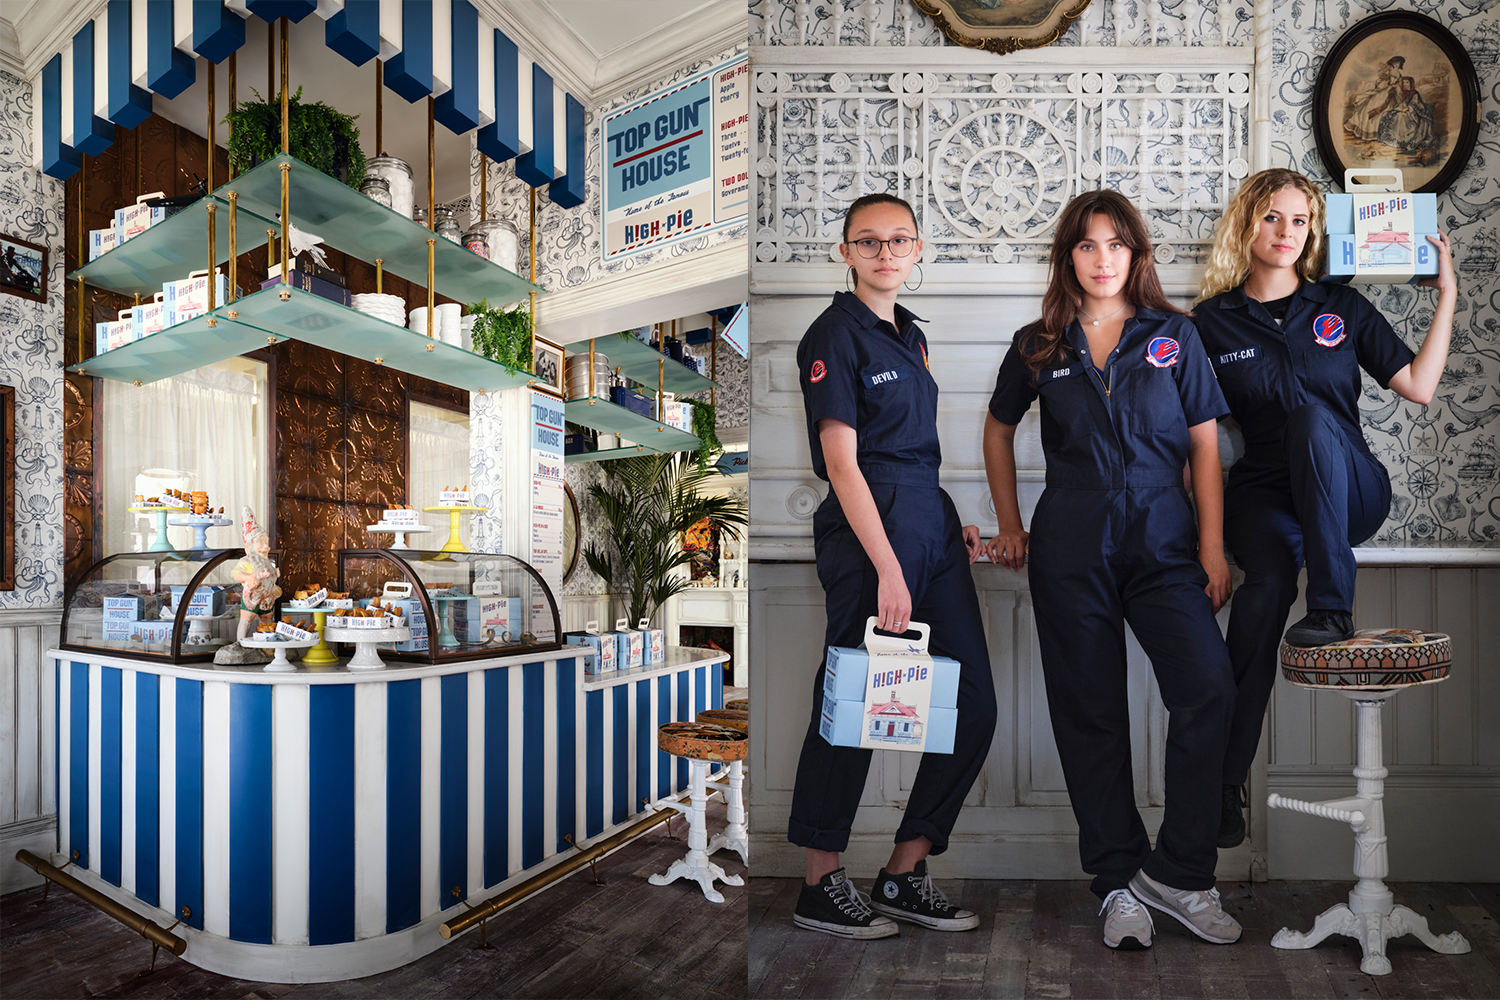 The inside of the "Top Gun" house and High-Pie bakery in Oceanside, California